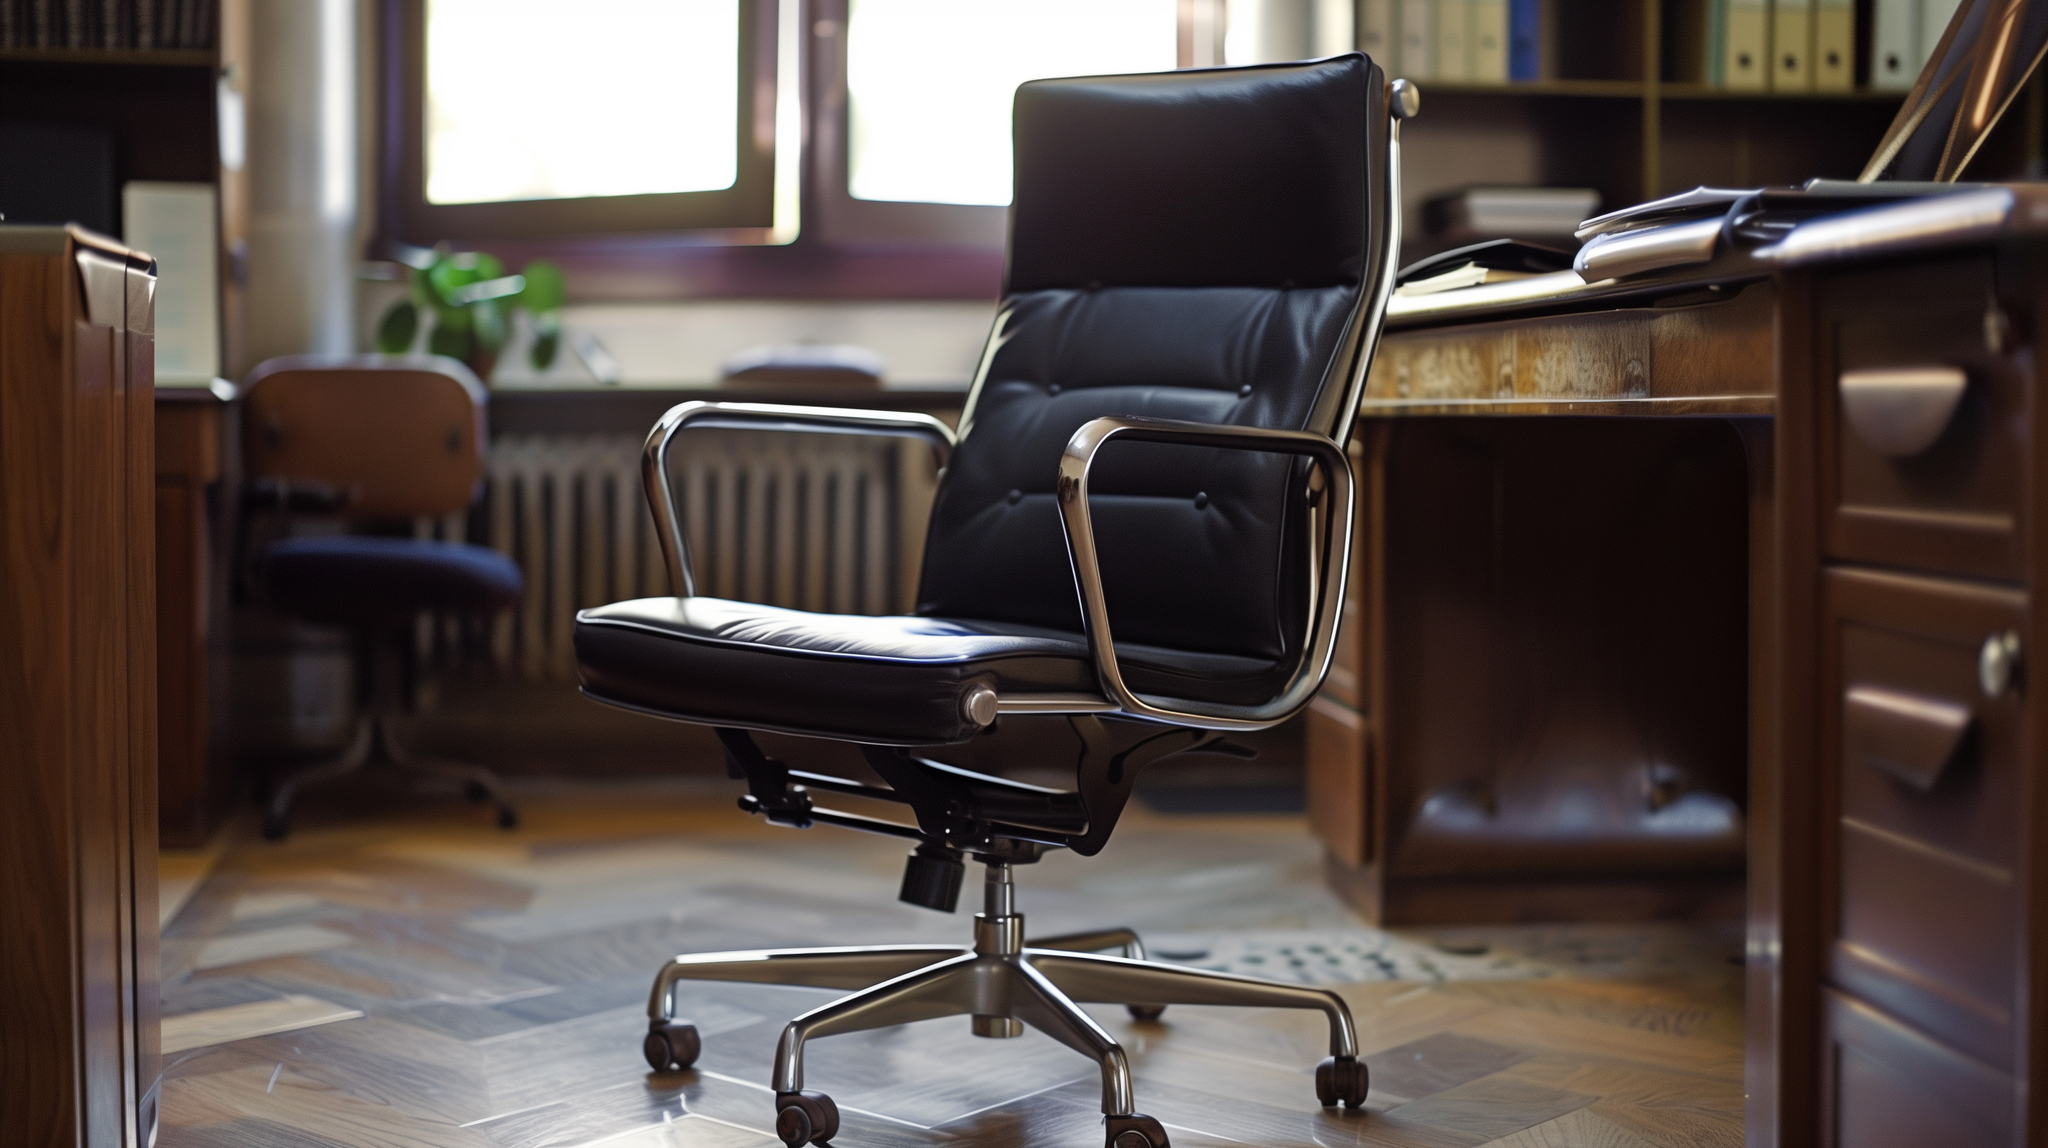 Upgrade-Your-Office-Chair-or-Pay-the-Price-5-Signs-Your-Body-Needs-More-Support OdinLake